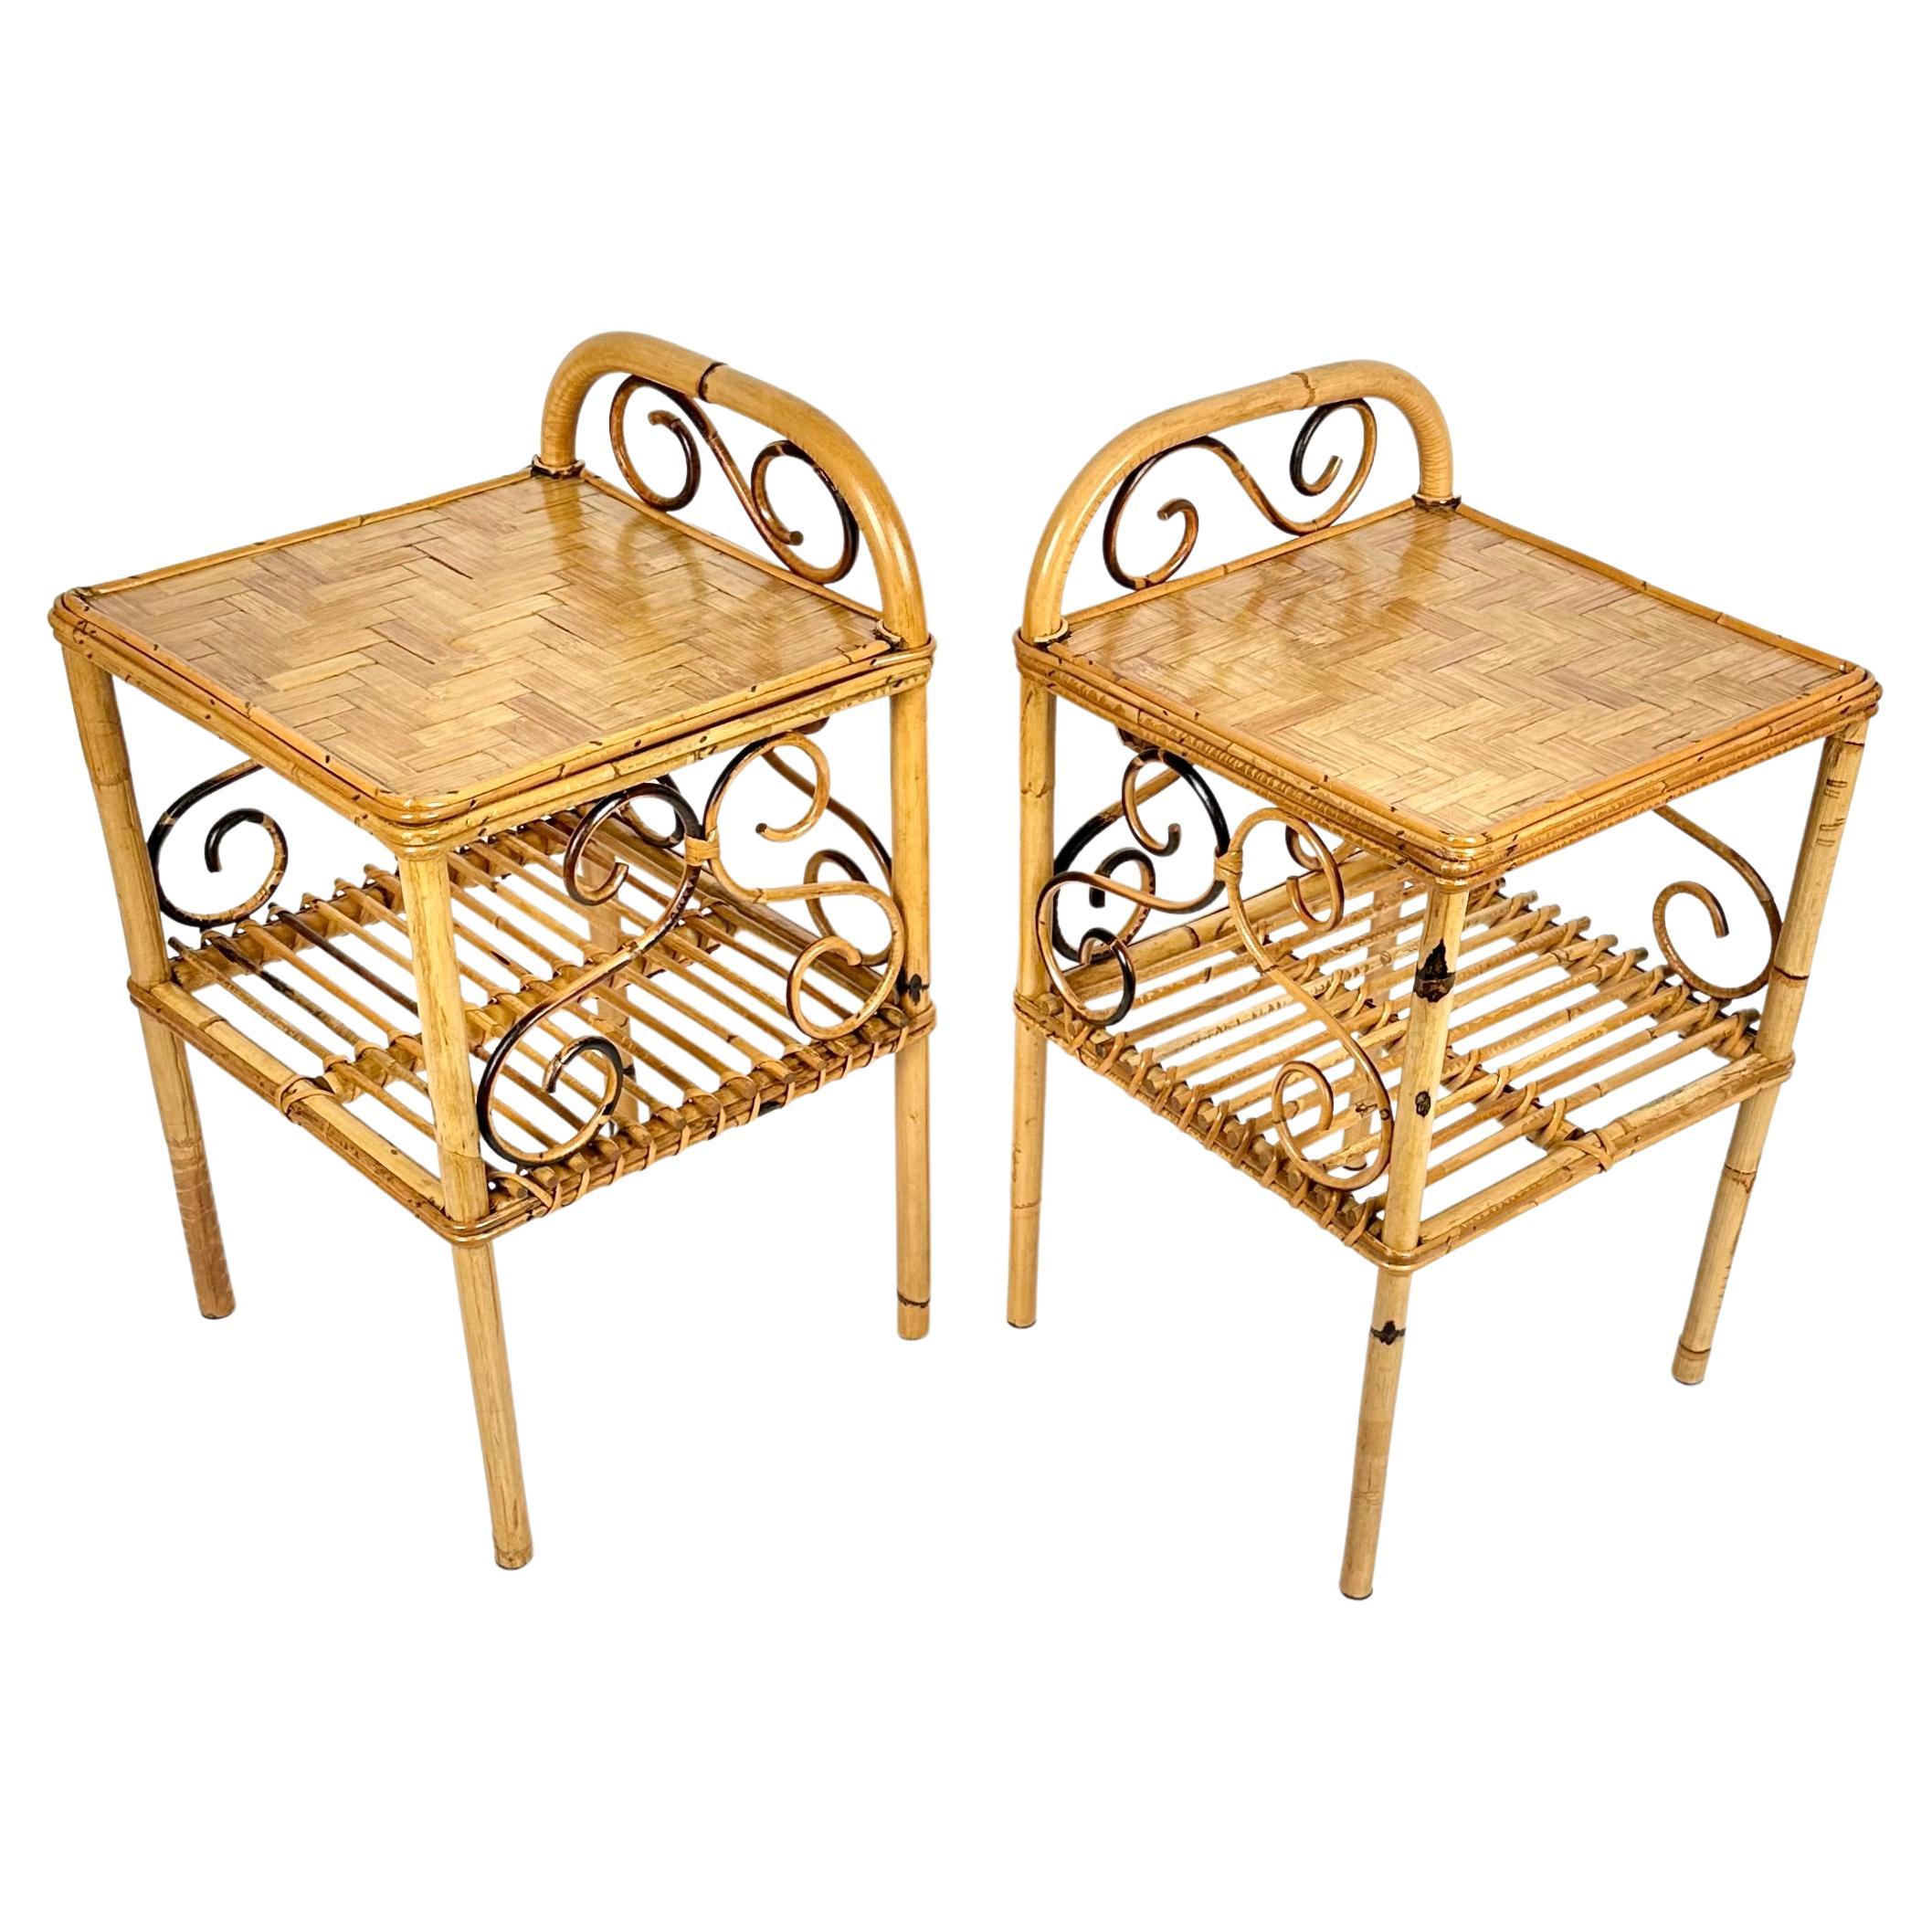 Midcentury beautiful pair of bedside tables in bamboo and rattan in the style of Franco Albini.

Made in Italy in the 1960s.